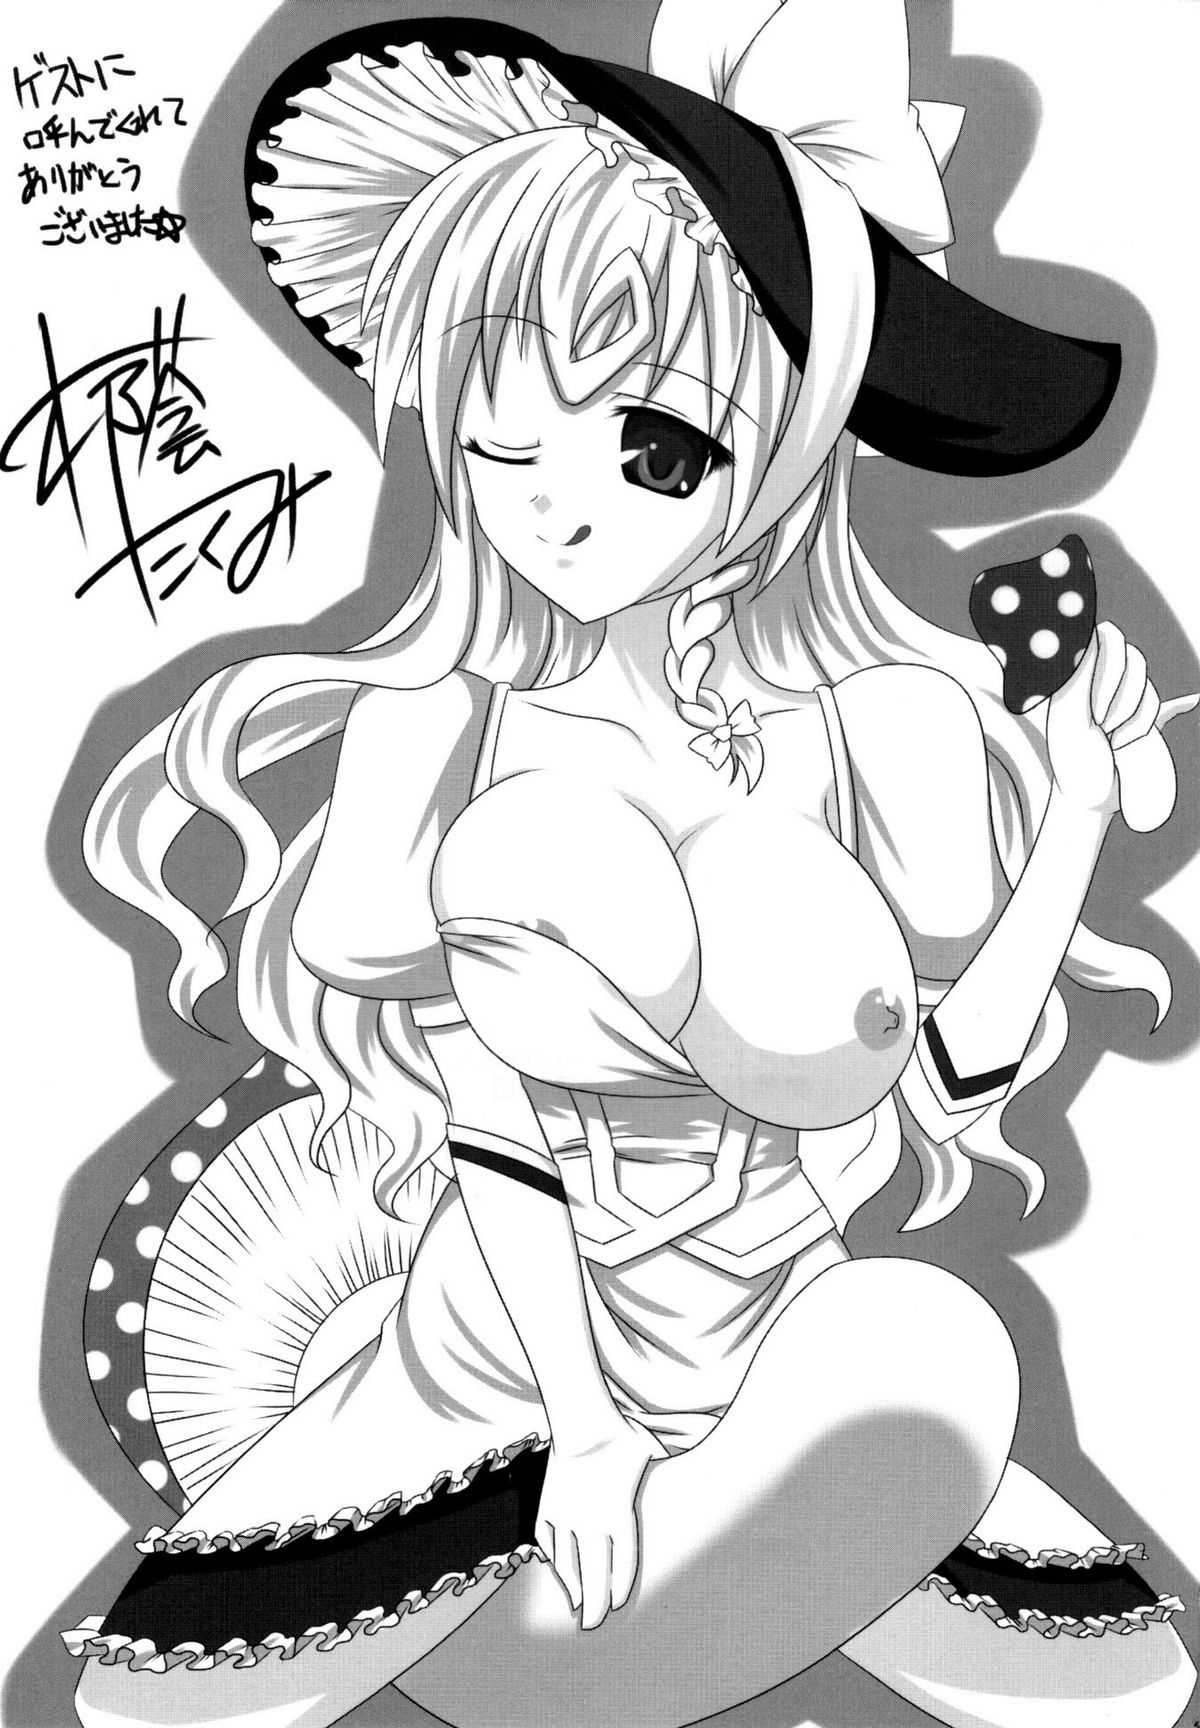 (Touhou Kouroumu 06) [Forever and ever... (Eisen)] GLAMOROUS MARISA (Touhou Project) [English] =Pineapples r Us= (東方紅楼夢 06) [Forever and ever... (英戦)] GLAMOROUS MARISA (東方Project) [英語]